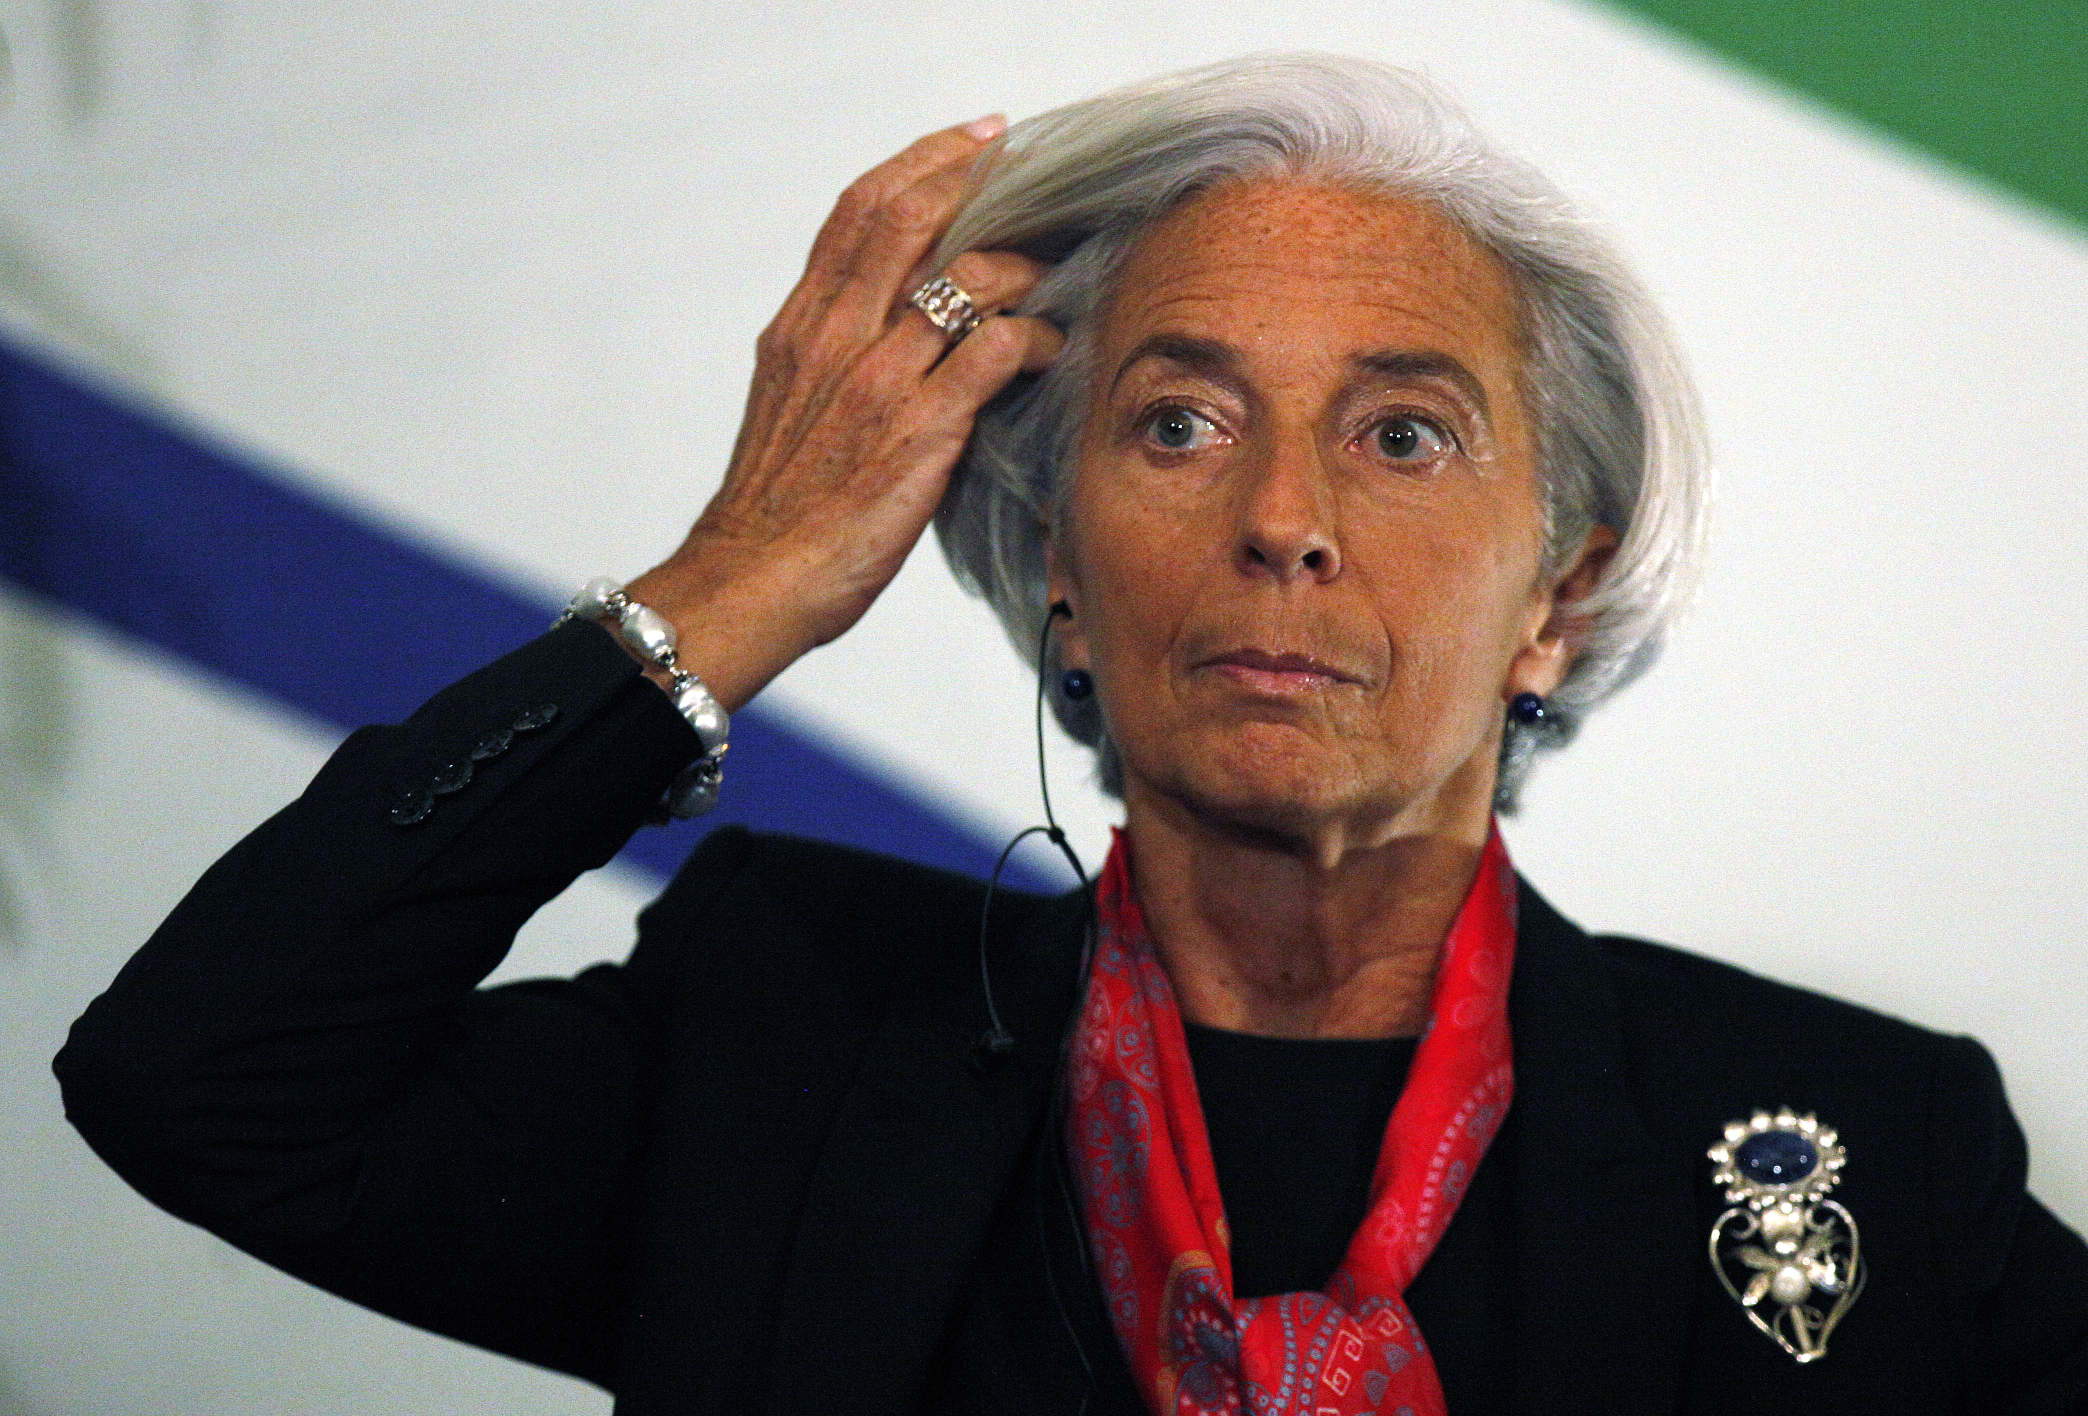 IMF head Christine Lagarde said she was disappointed at the newly pass US spending legislation, which did not include key funding necessary for International Monetary Fund reforms. Photo: AP